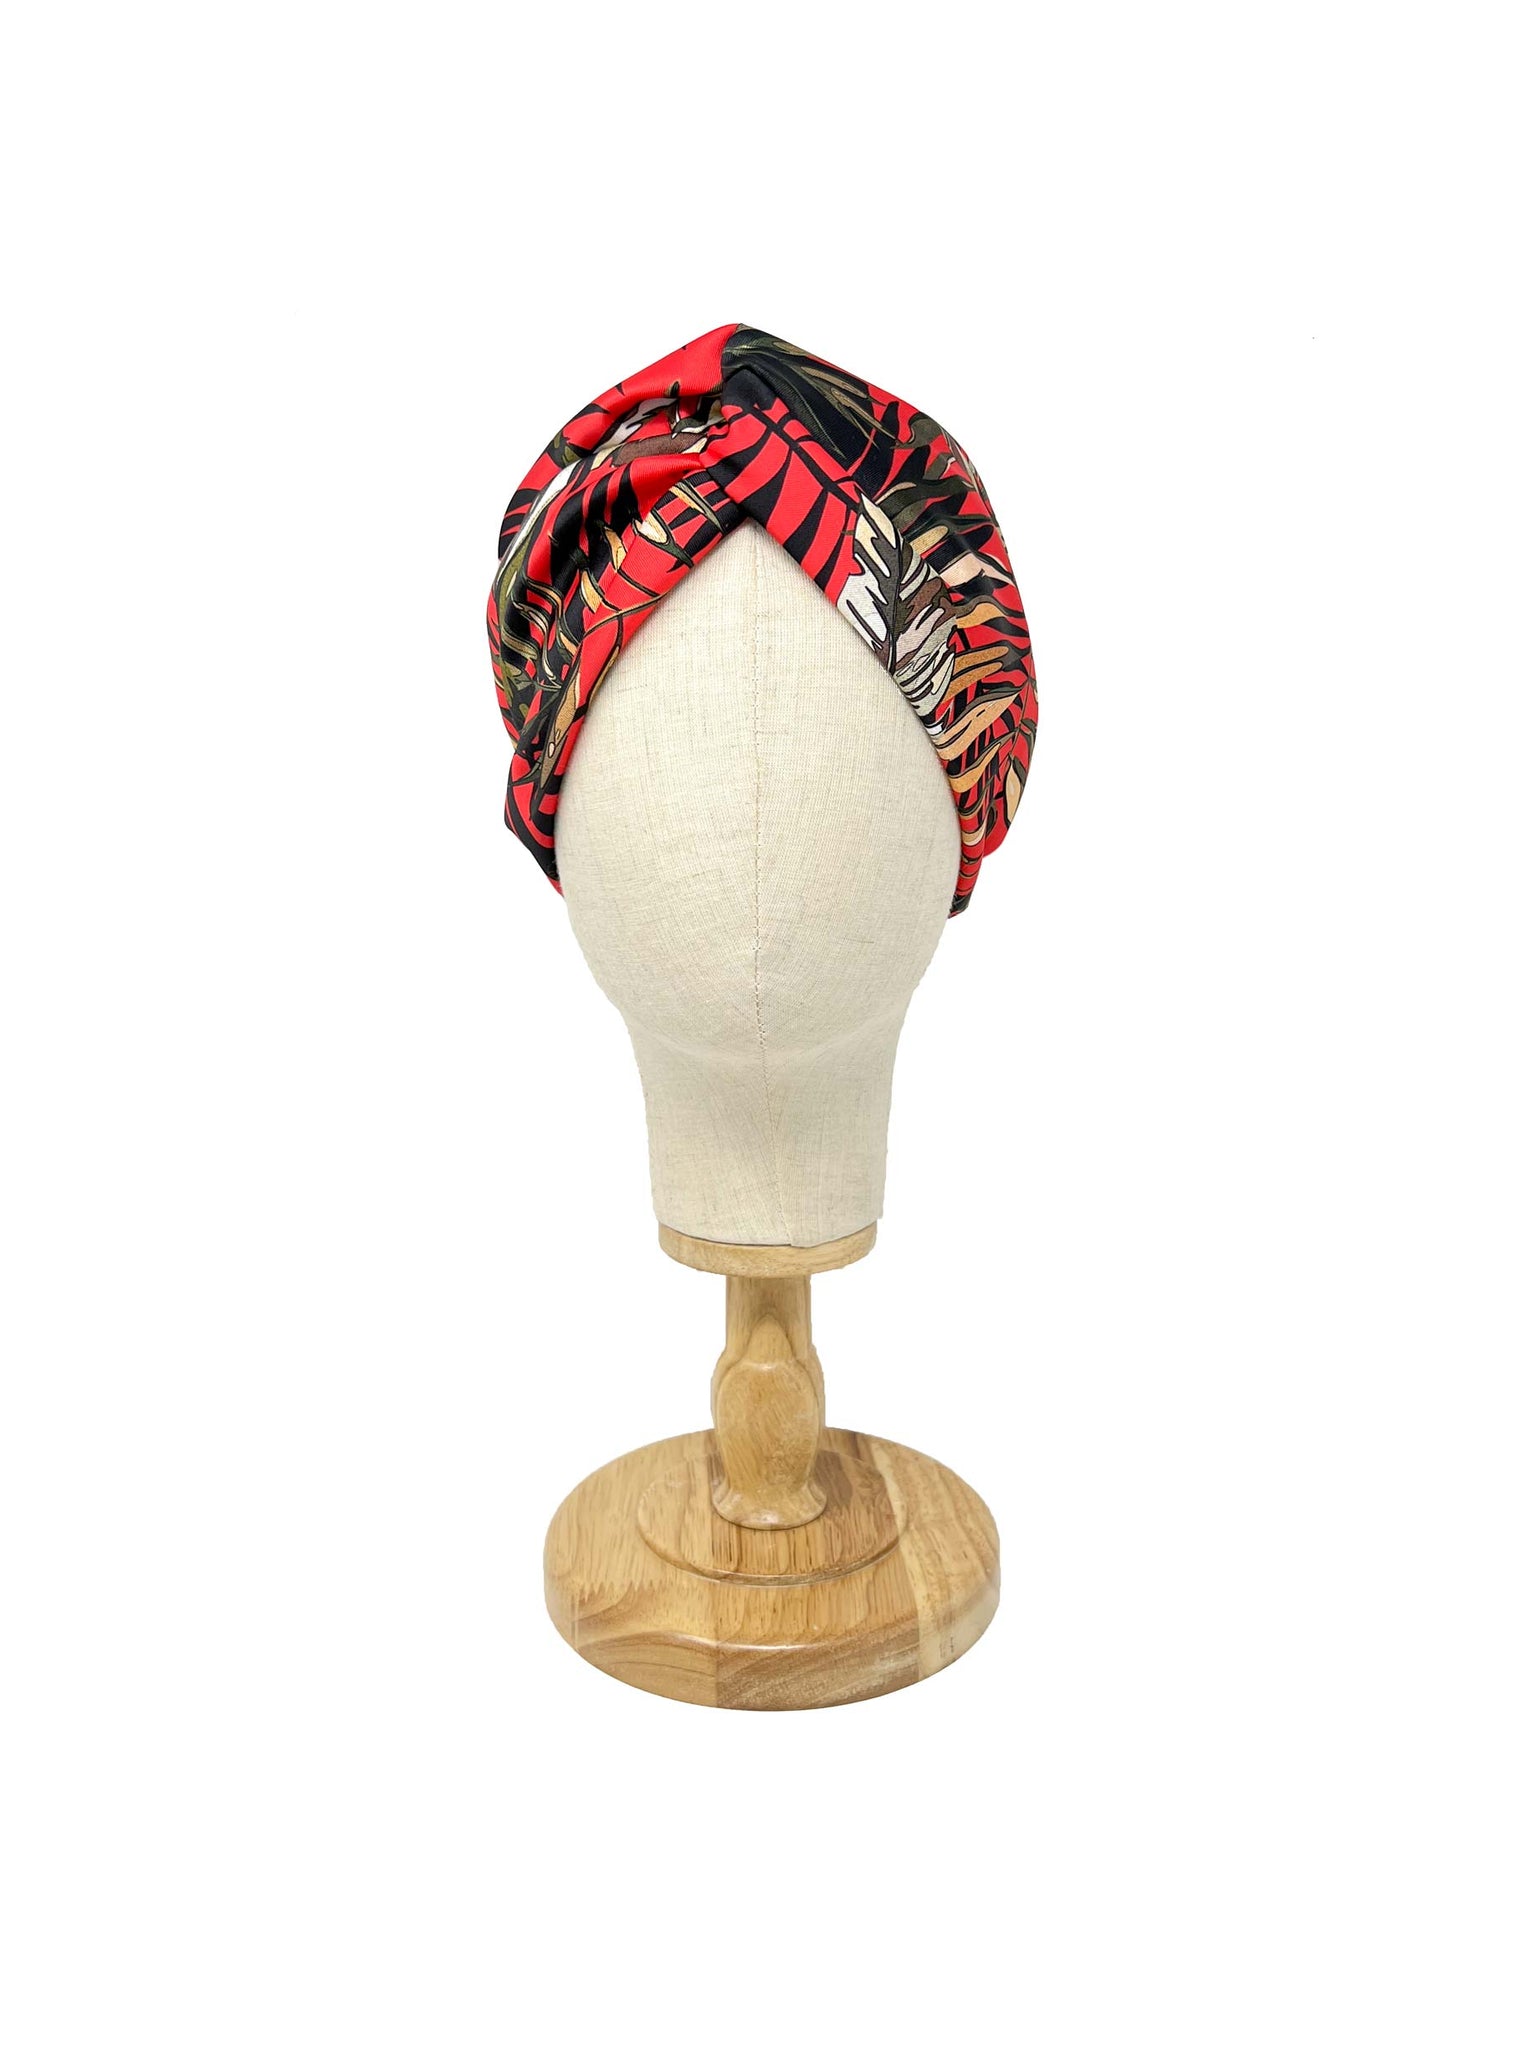 Tropical patterned red satin headband